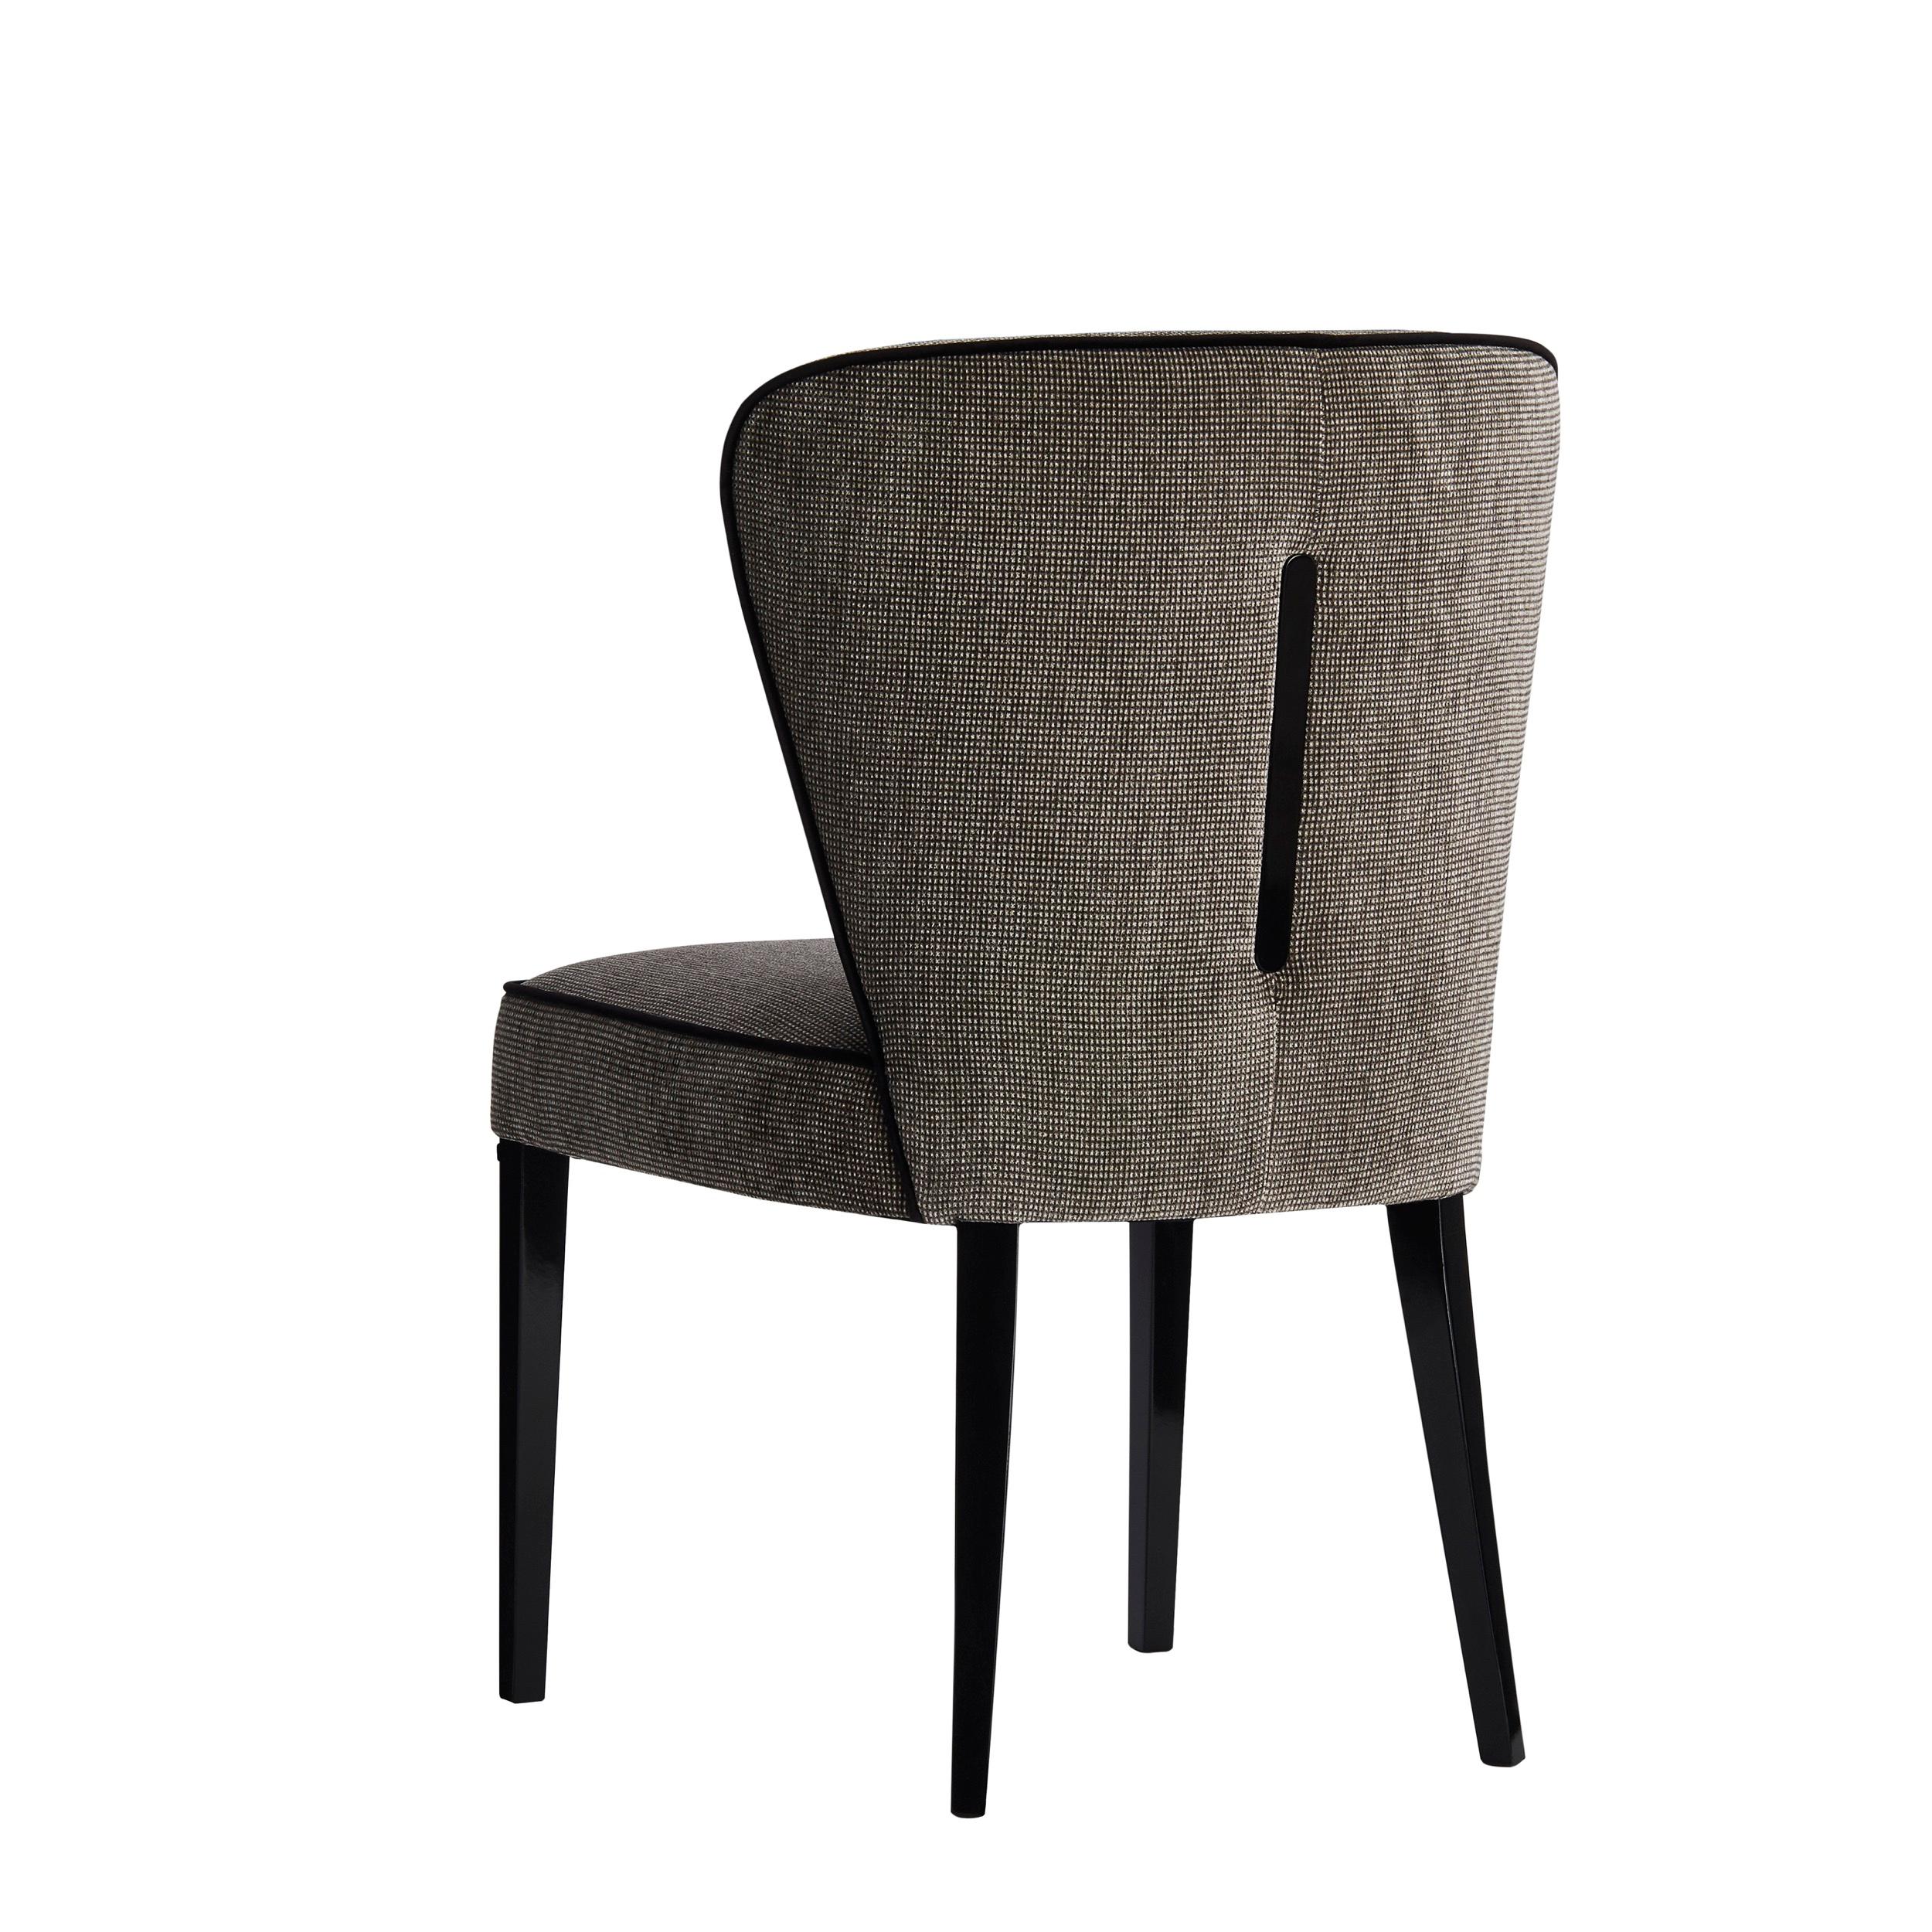 Comfortable and elegant chair, the RIBEIRA gives the dining room a sober look.‎ Upholstered in fabric and enriched by contrasting details on the seat and back.‎ Ribeira is also available in natural leather, leatherette or COM.‎
Shown upholstered